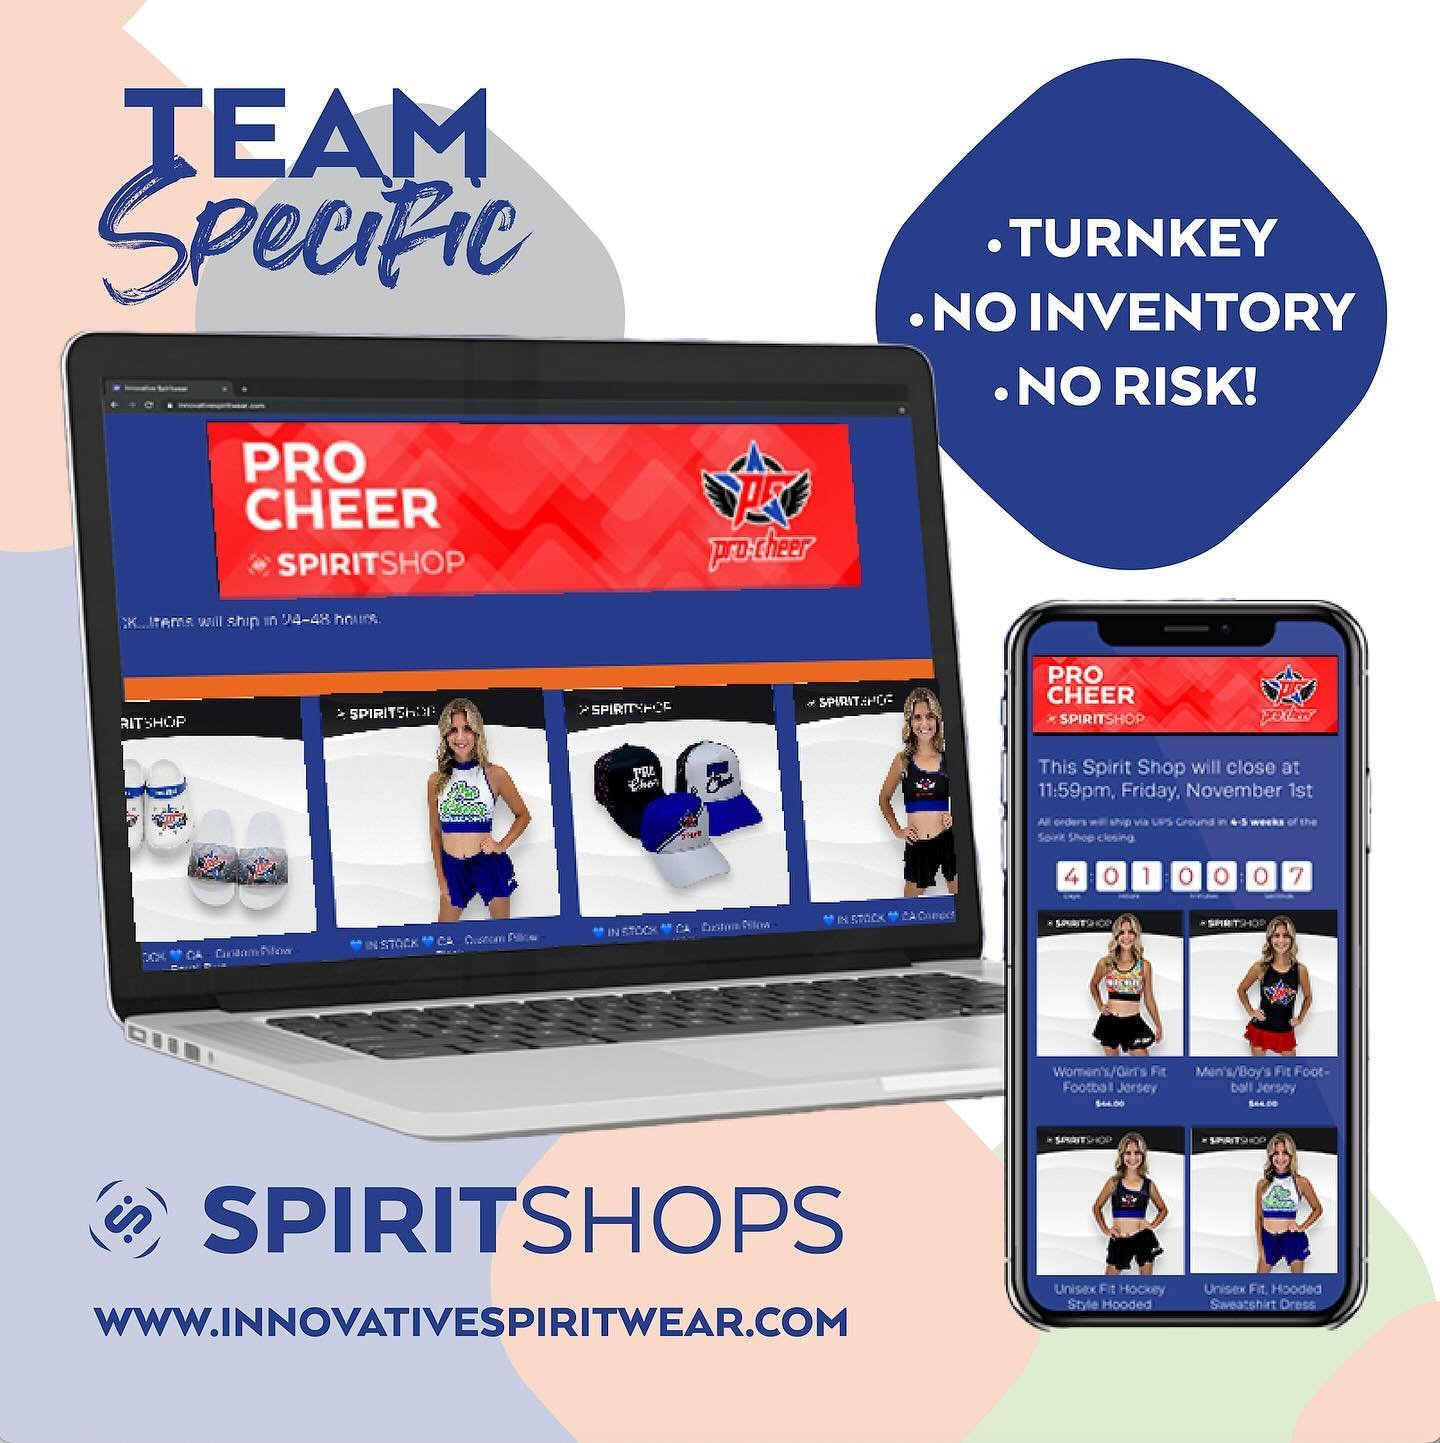 Who Needs An Online SpiritShop? 
Sell your custom apparel and accessories in your custom online store from Innovative Spiritwear! SpiritShop&rsquo;s are turnkey and risk free!⠀
⠀
Gym Owner&rsquo;s: Send us a message at http://innovativespiritwear.com